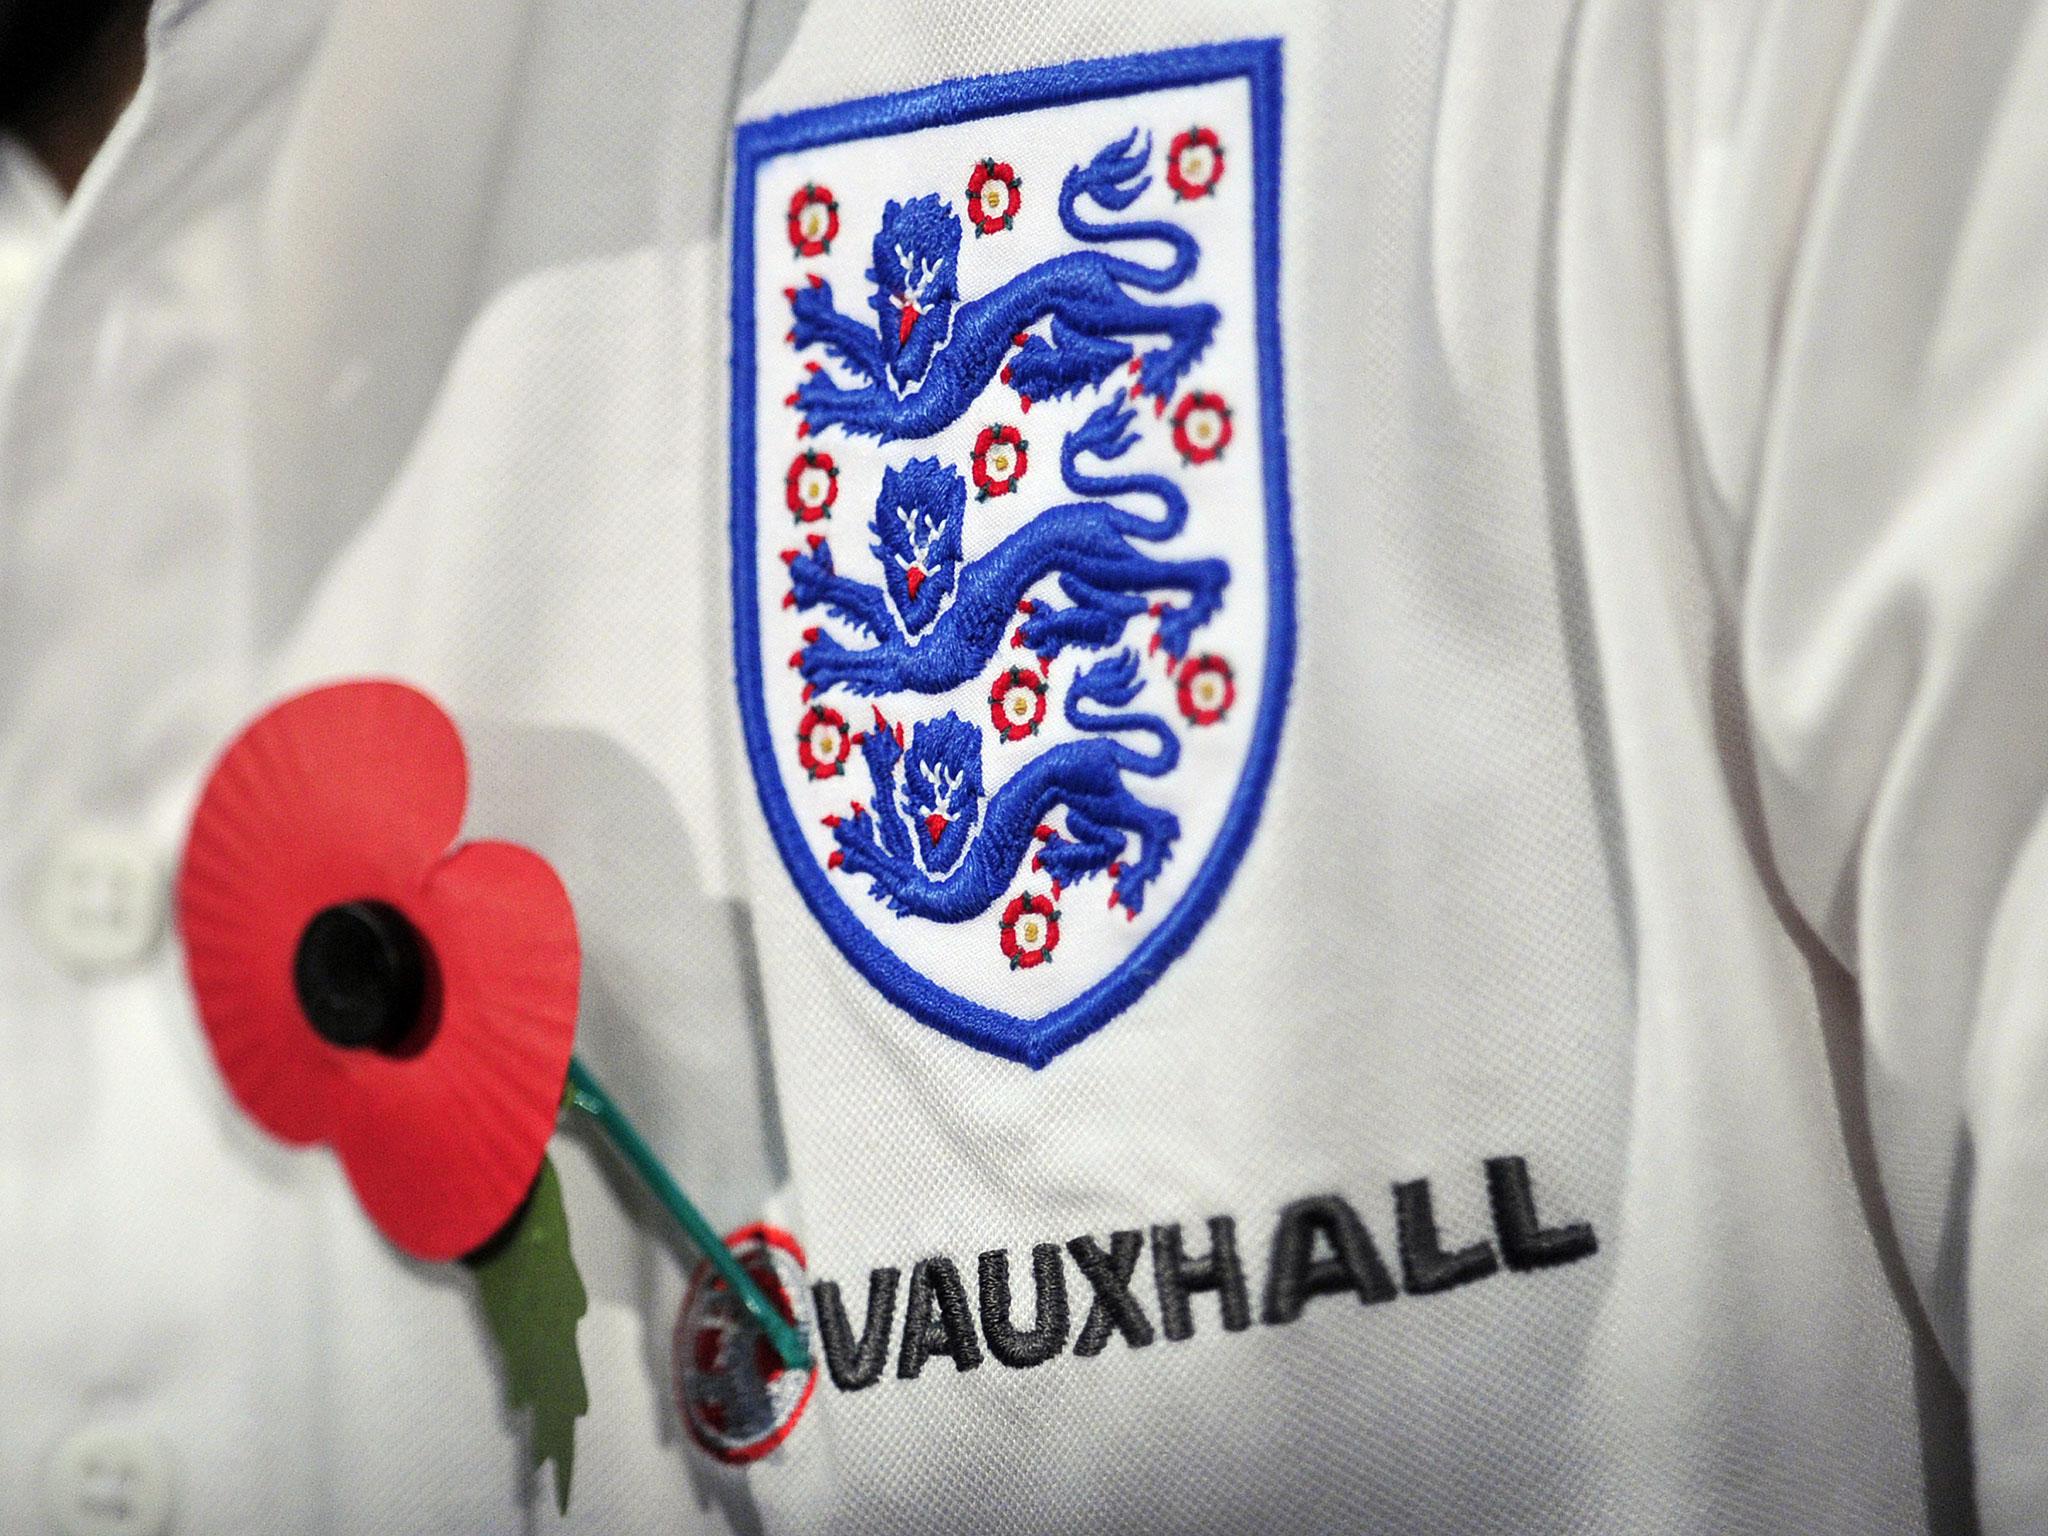 The FA declared on Wednesday that England's players will wear armbands bearing the poppy